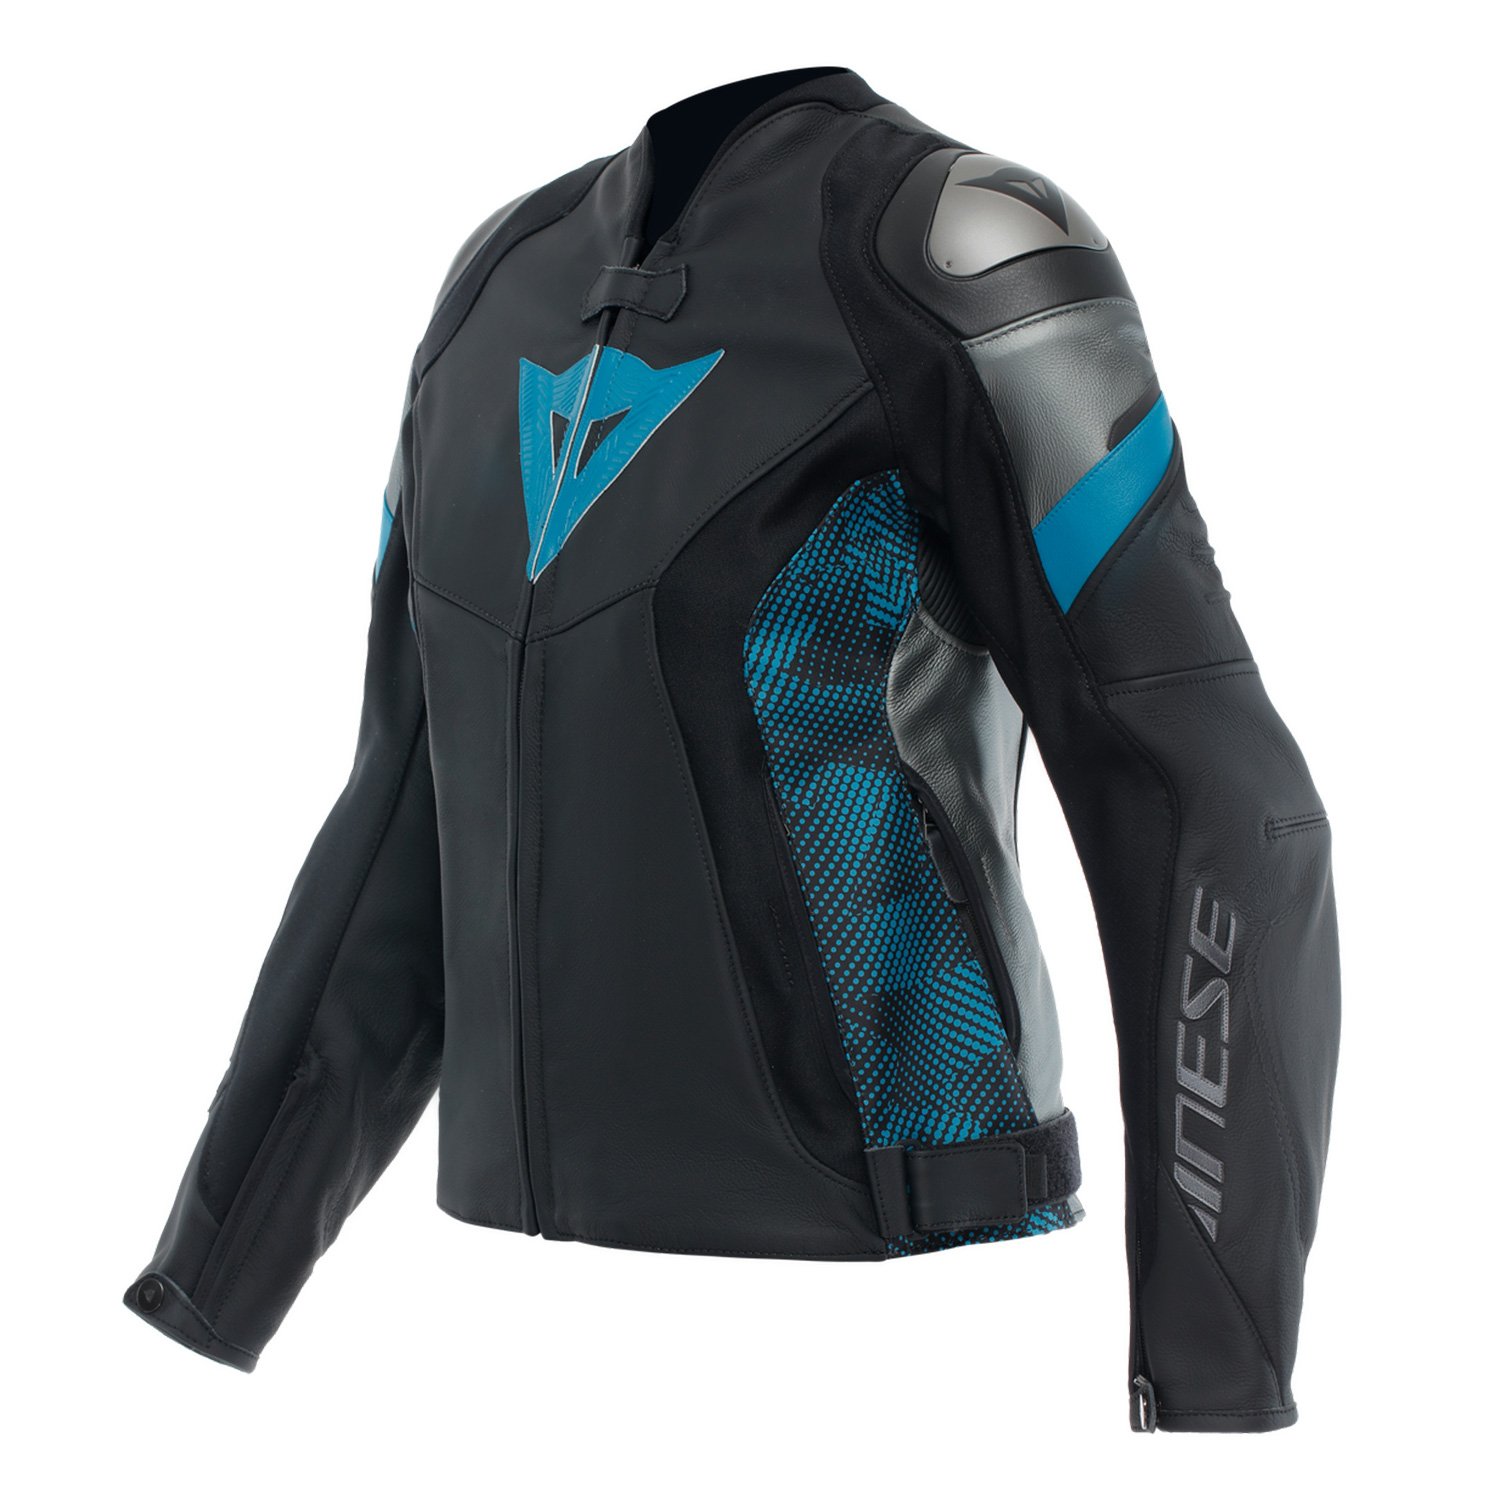 Image of Dainese Avro 5 Leather Jacket WMN Black Teal Anthracite Größe 38